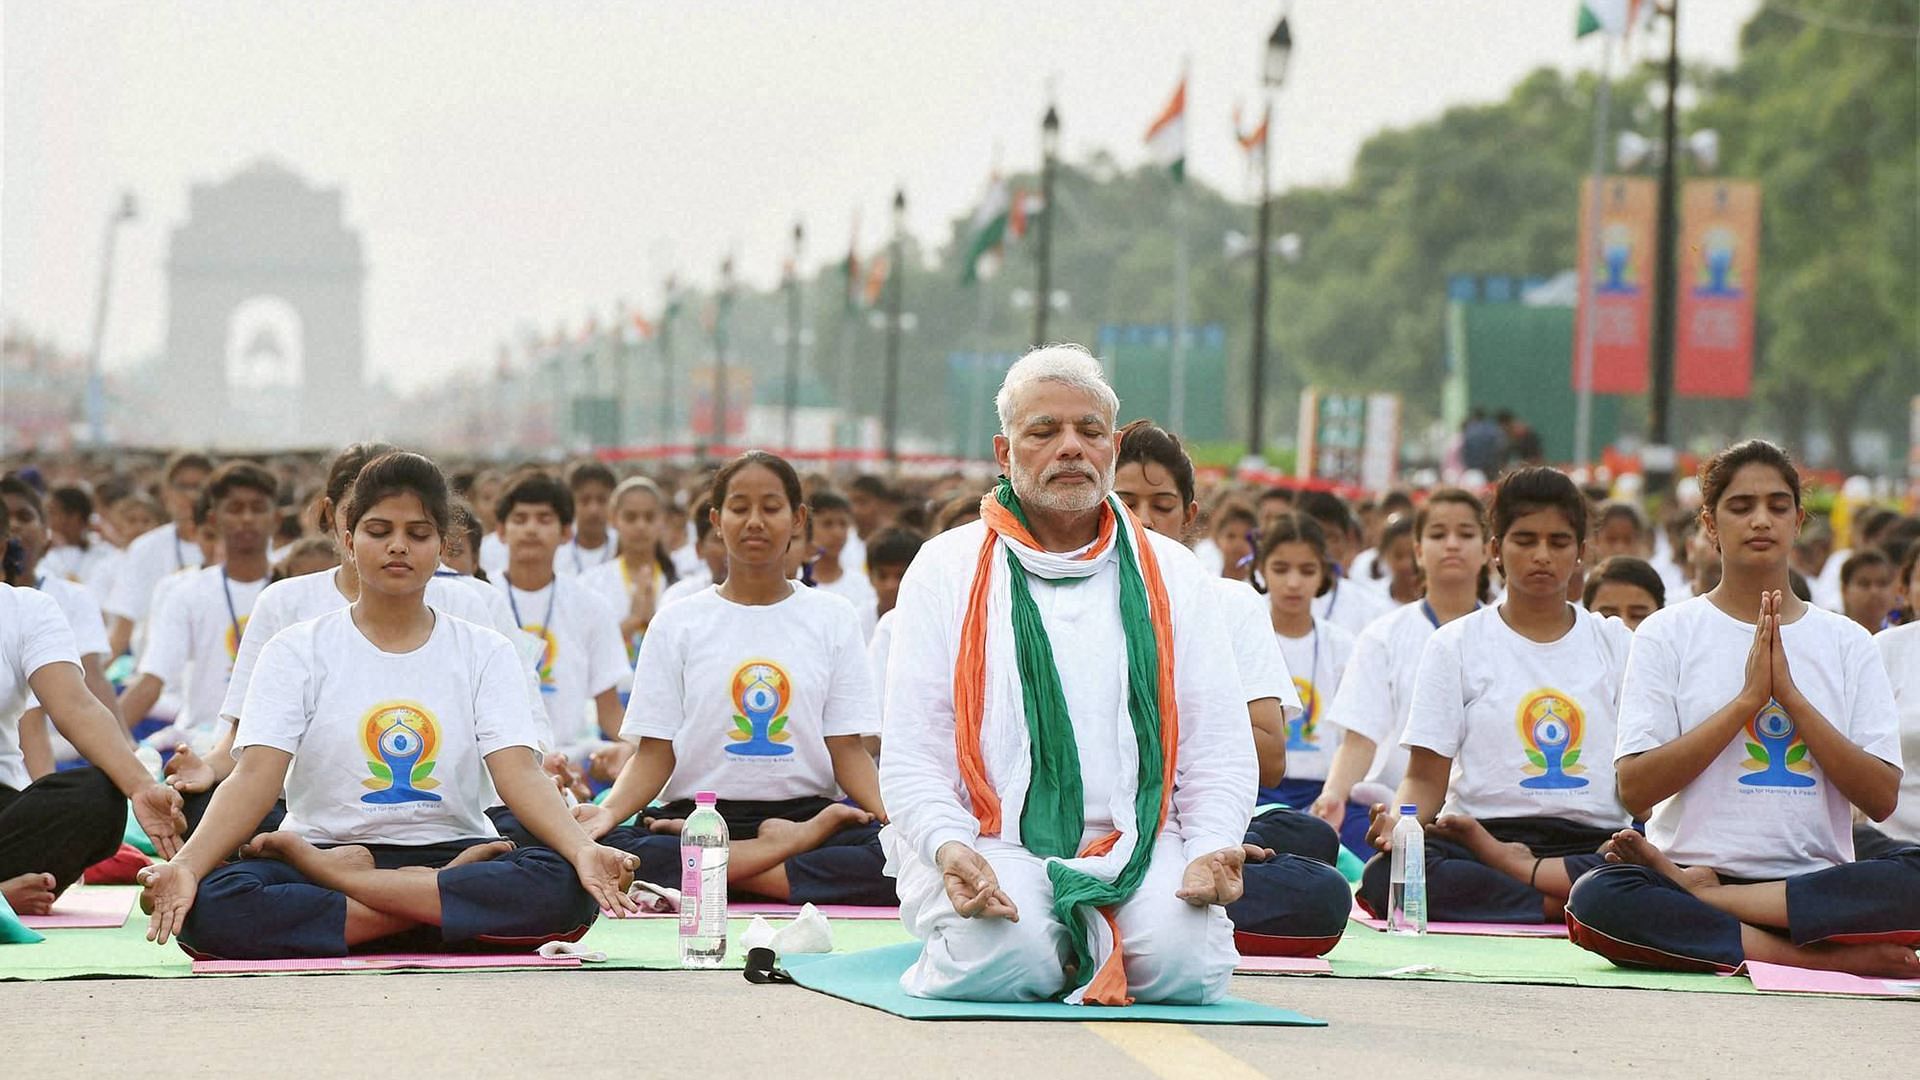 Prime Minister Narendra Modi performs yoga along with other participants during a mass yoga session on the International Day of Yoga 2015 at Rajpath in New Delhi. (Photo: PTI)